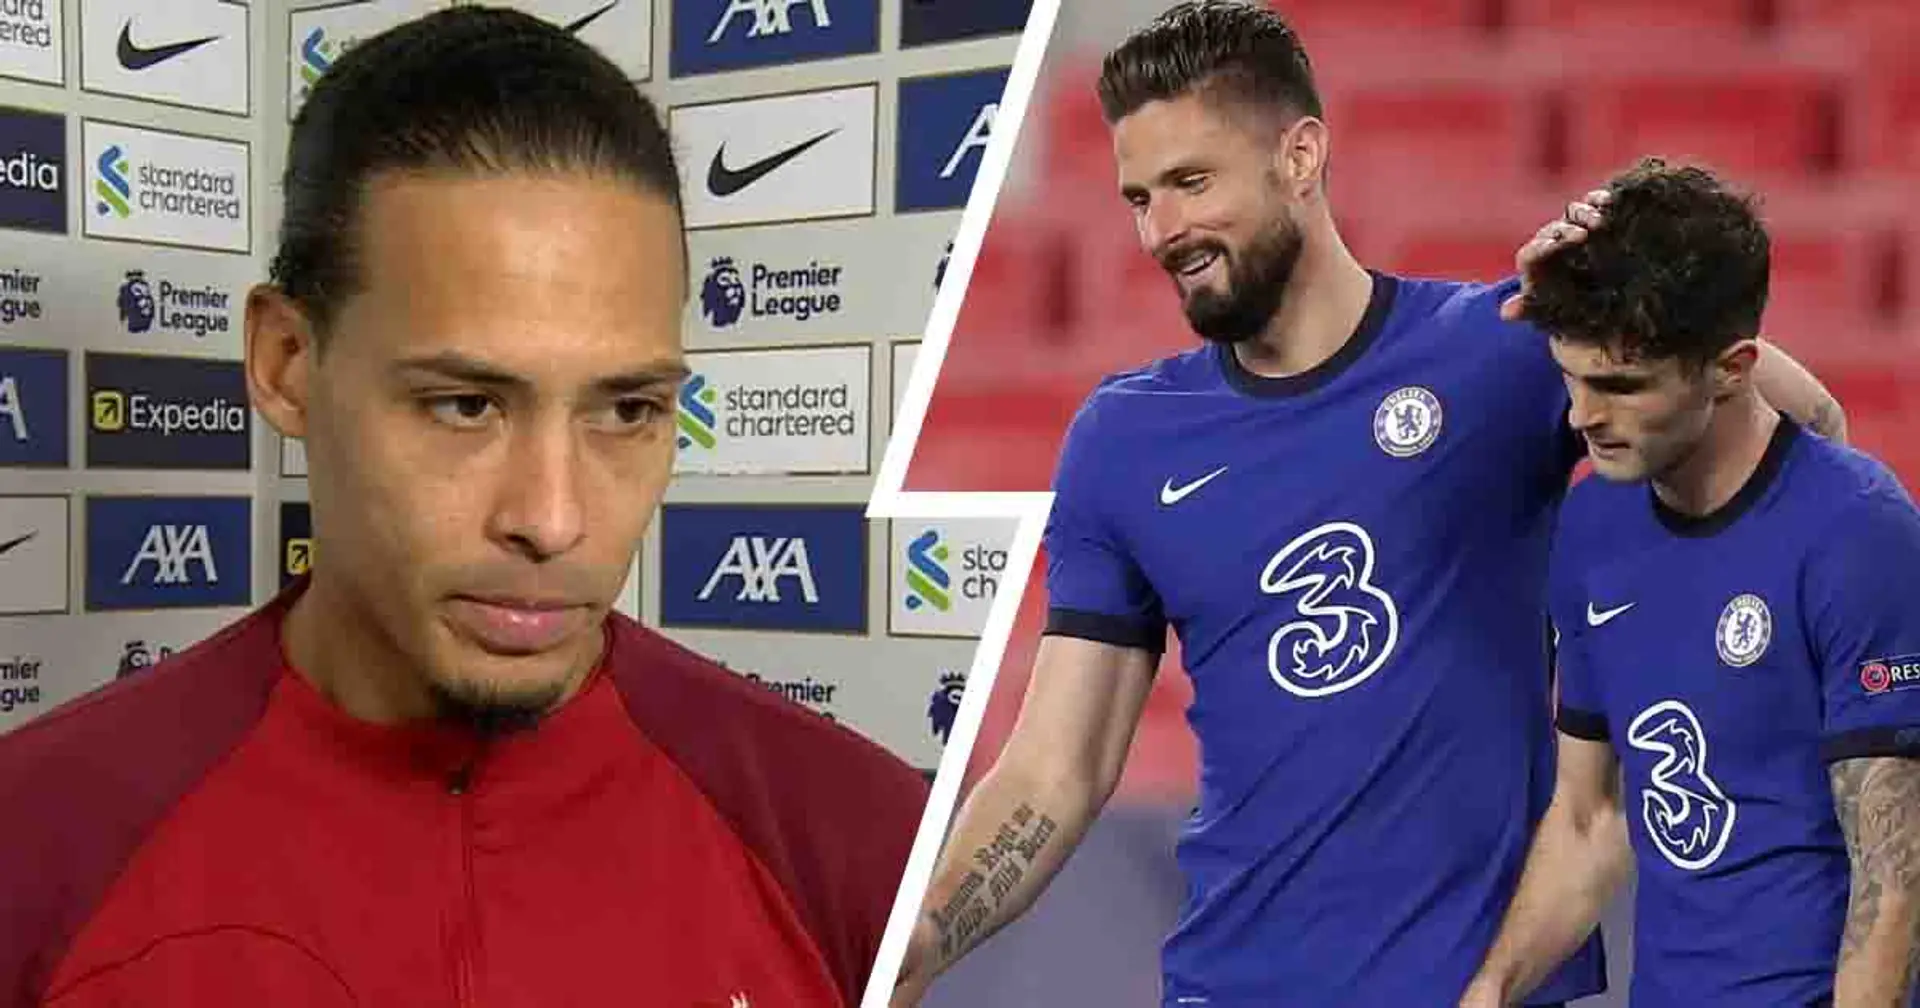 ‘Just that annoying person’: Virgil van Dijk names ex-Chelsea forward as his toughest opponent